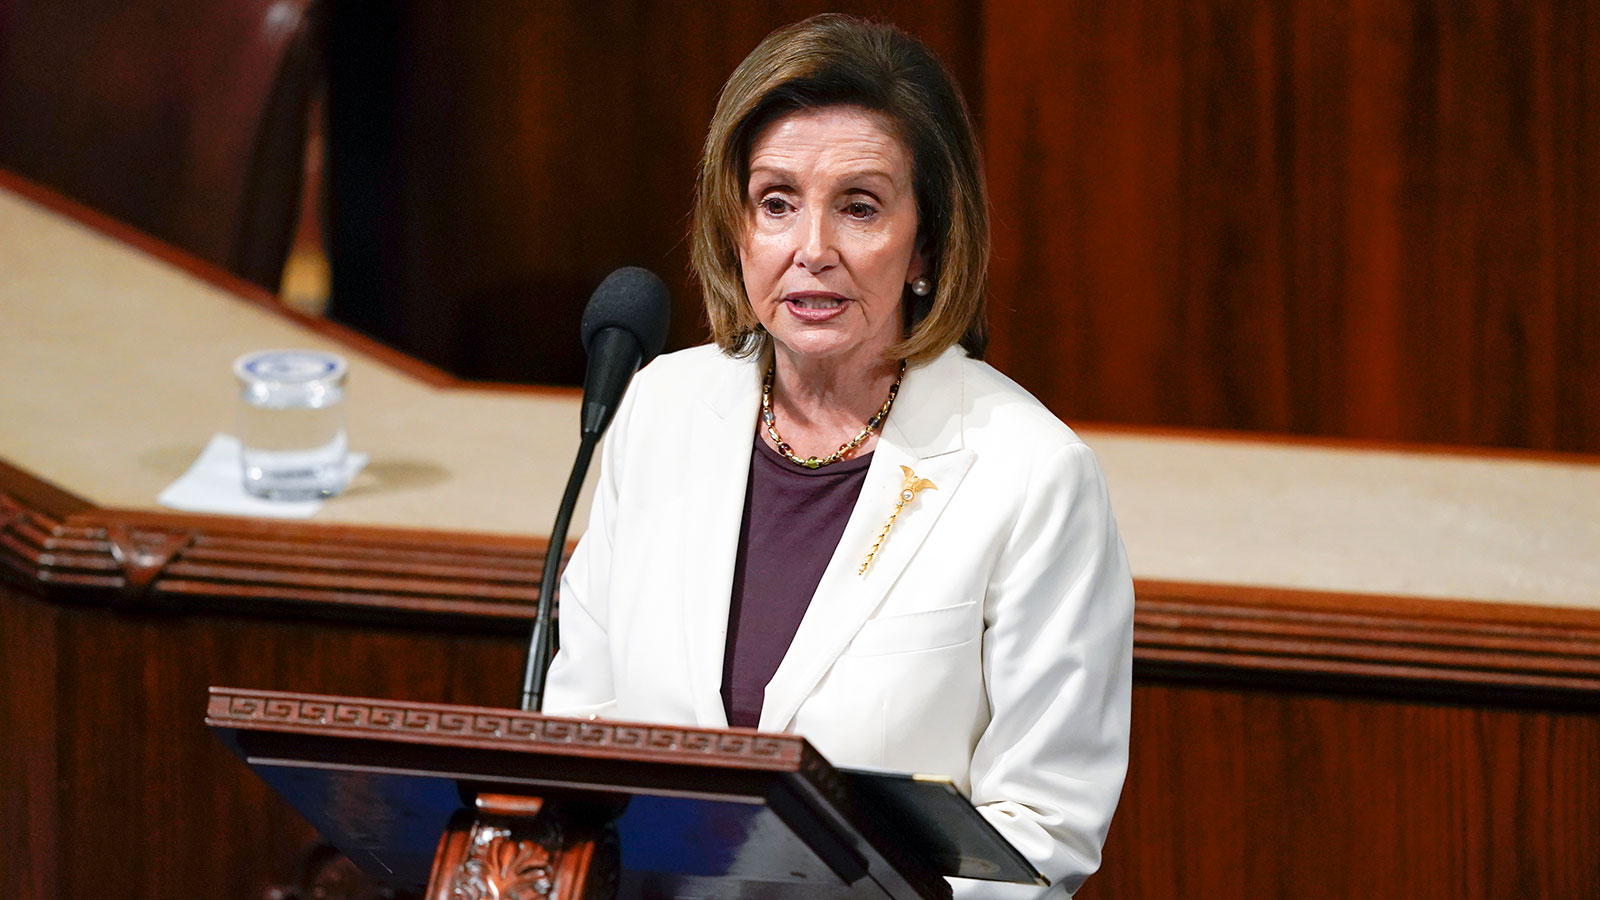 Nancy Pelosi to step down from role after Republican victory